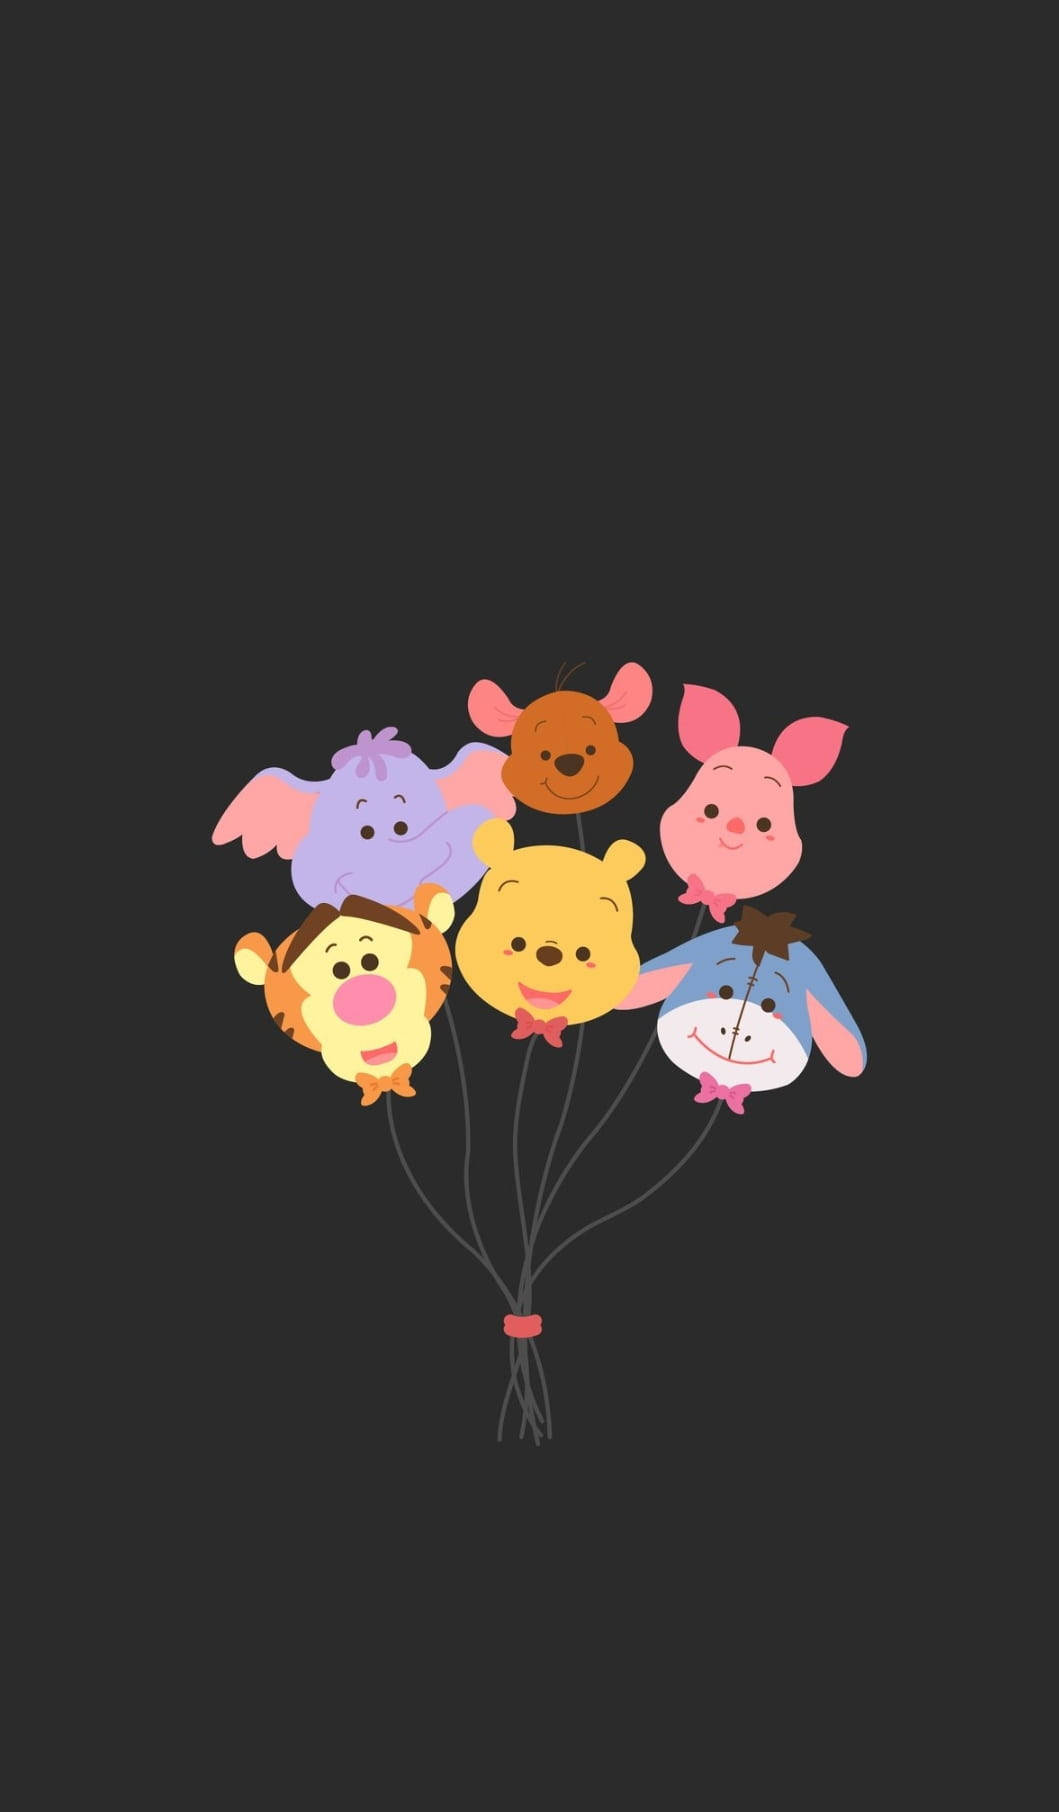 Free Disney Iphone Wallpaper Downloads, [200+] Disney Iphone Wallpapers for  FREE 